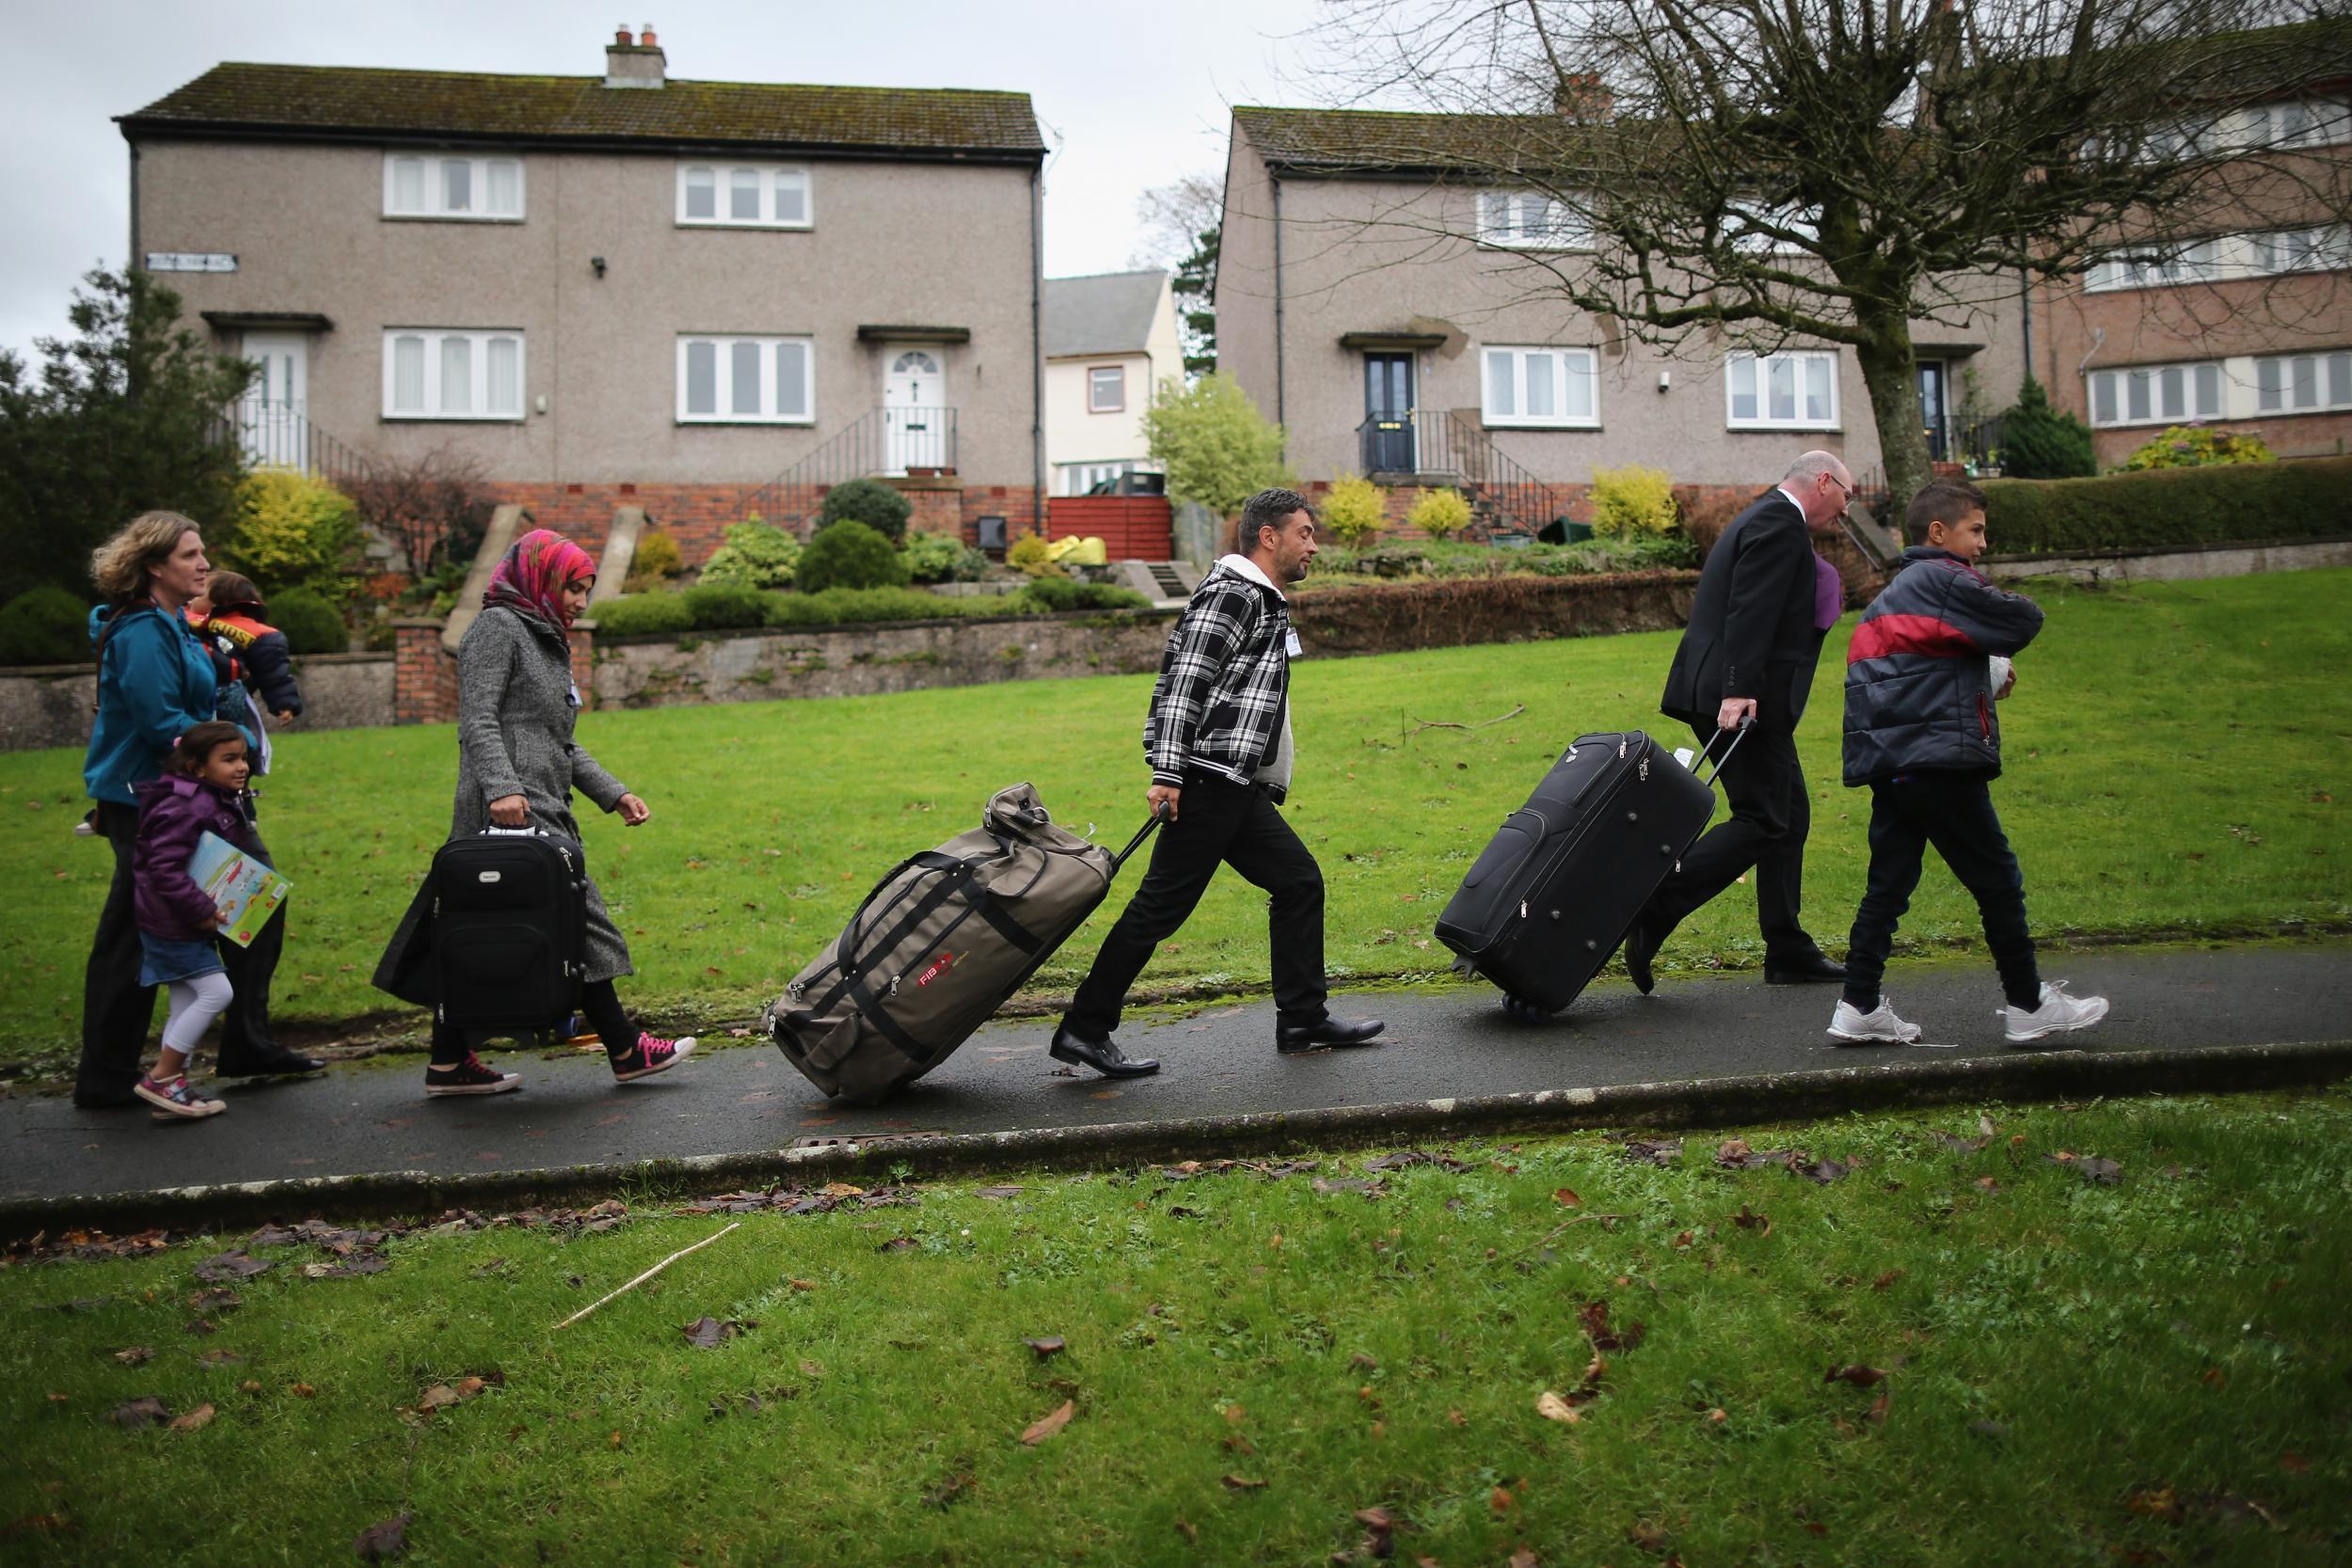 People fleeing from Syria to the UK have previously been given a special form of leave to remain instead of formal refugee status, which prevents them from accessing such services such as student finance and overseas travel documents